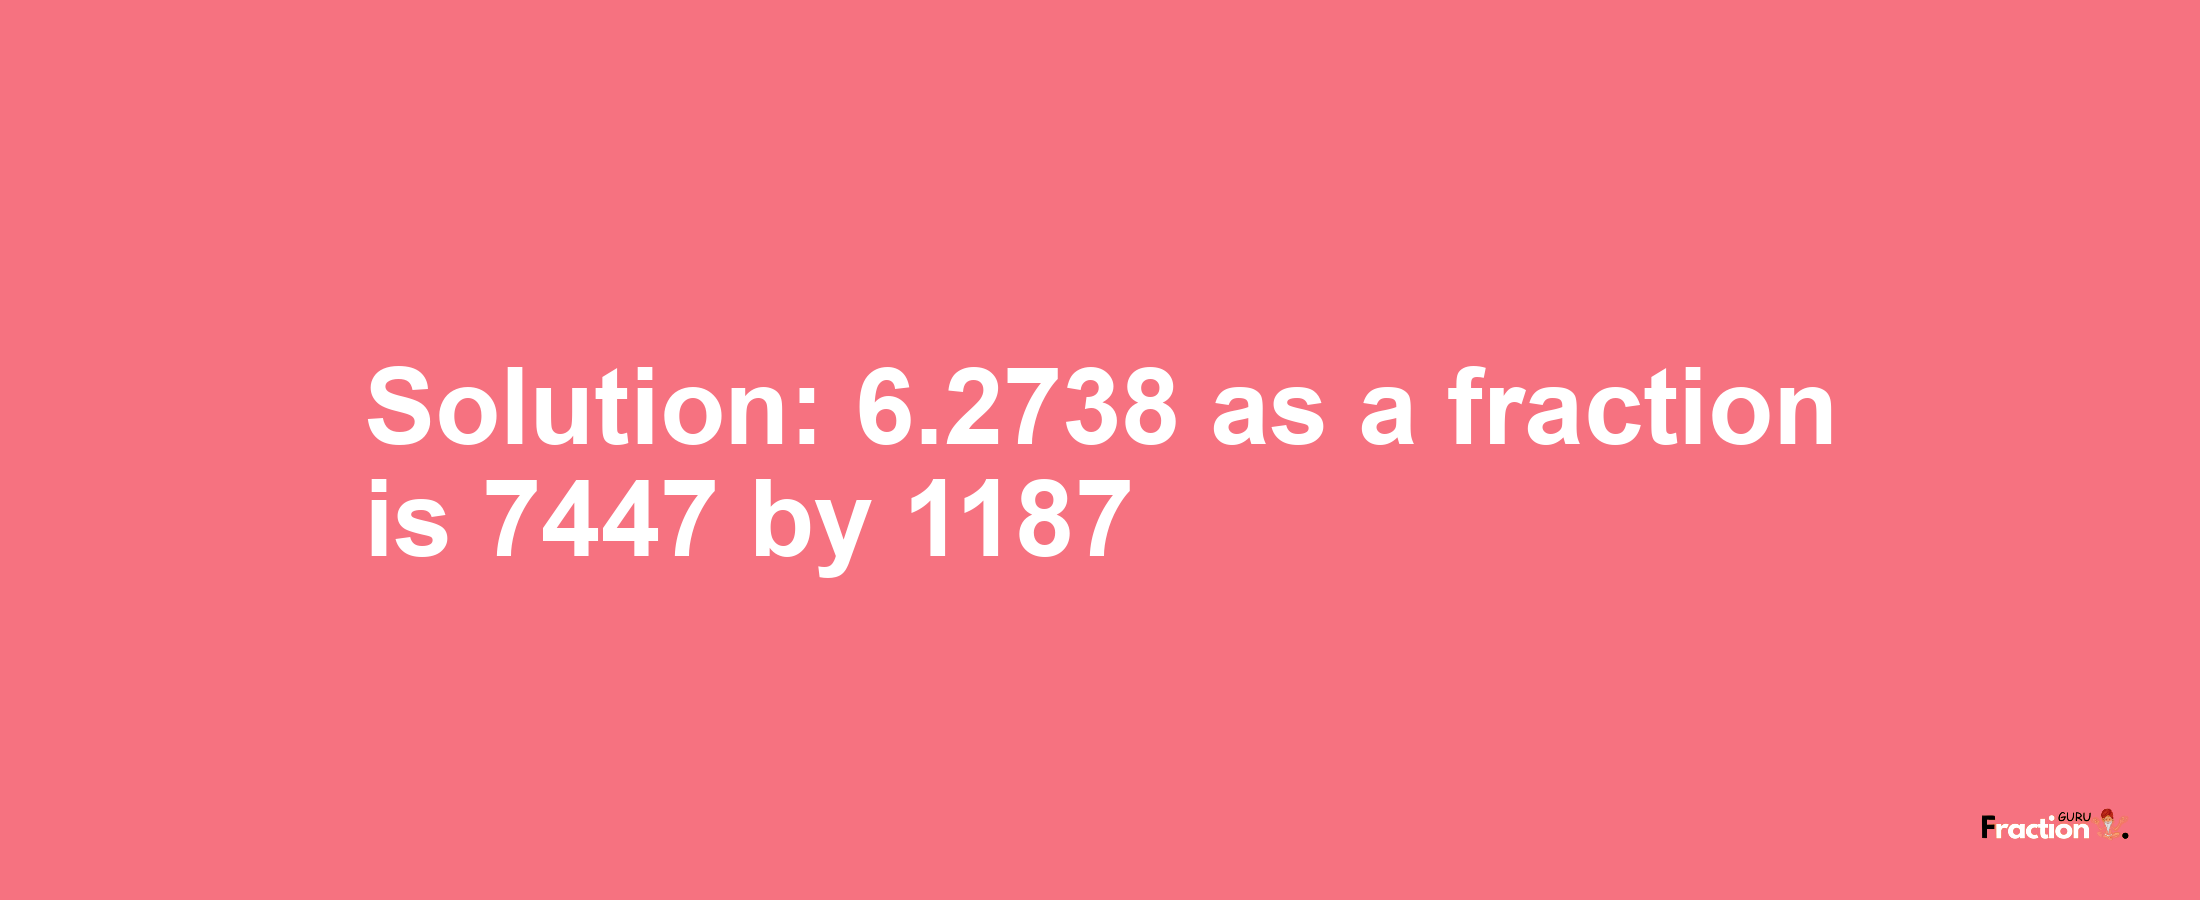 Solution:6.2738 as a fraction is 7447/1187